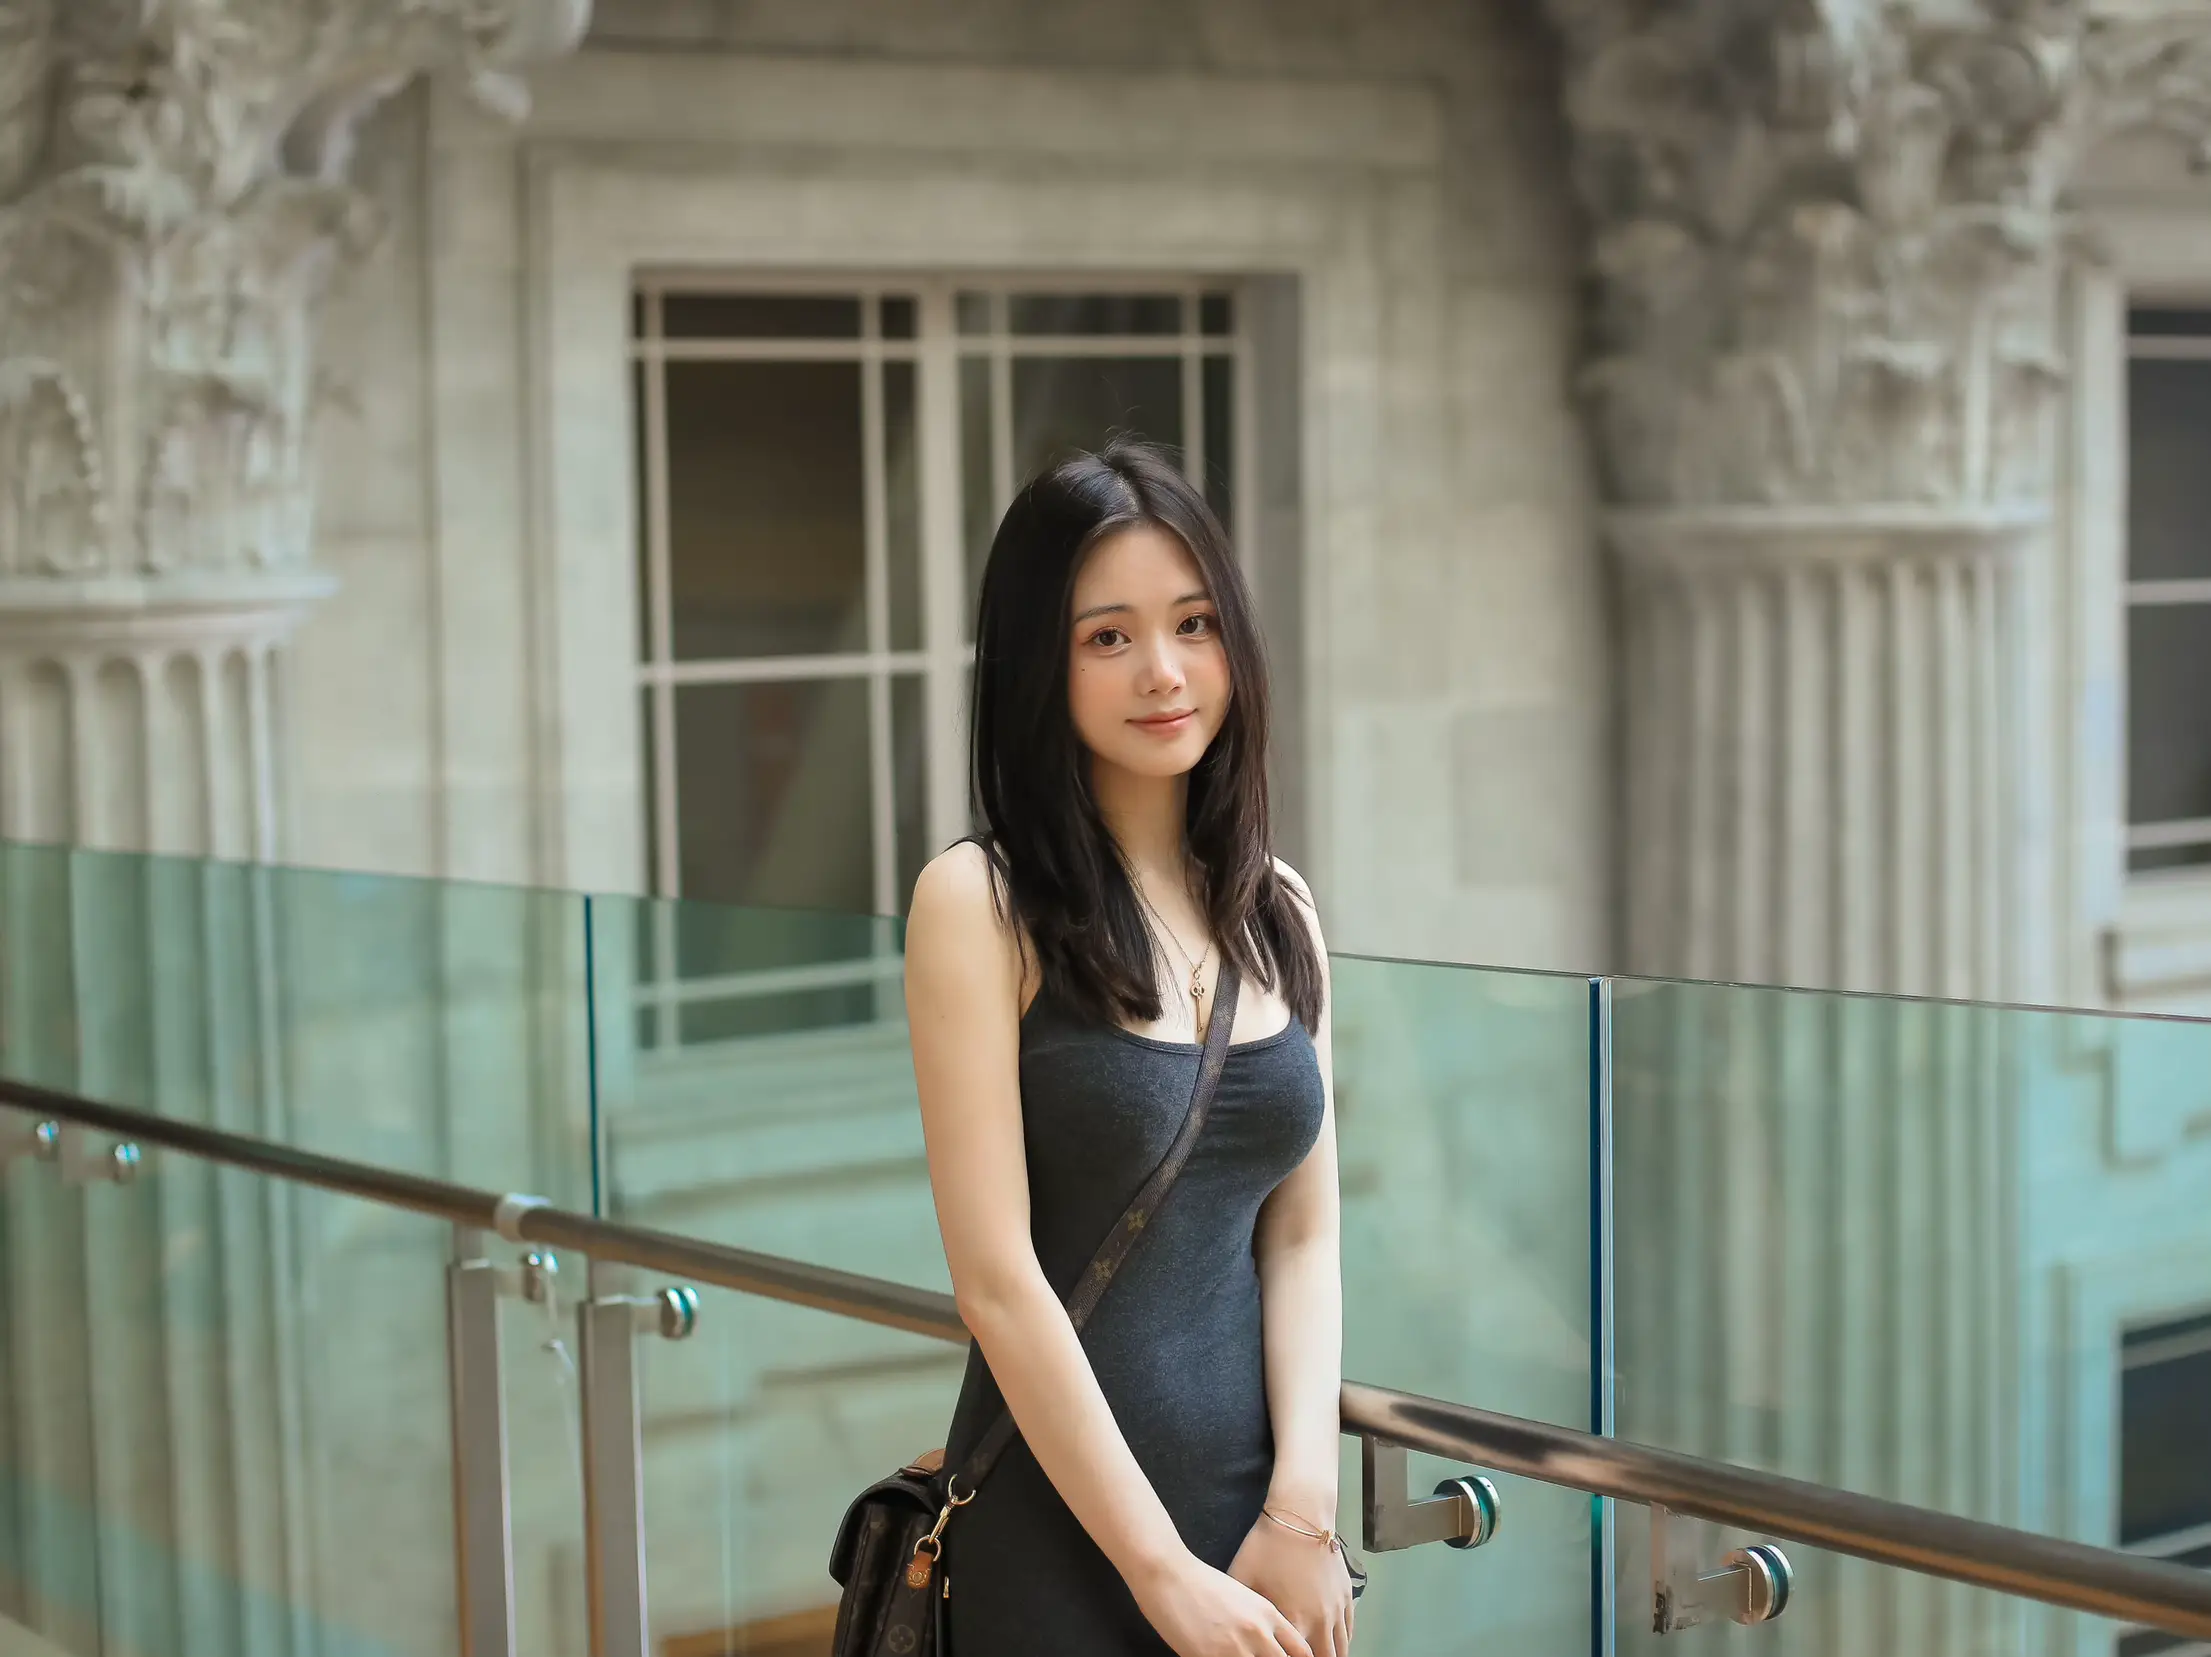 Photoshoot Spot You Must Visit - National Gallery's images(8)